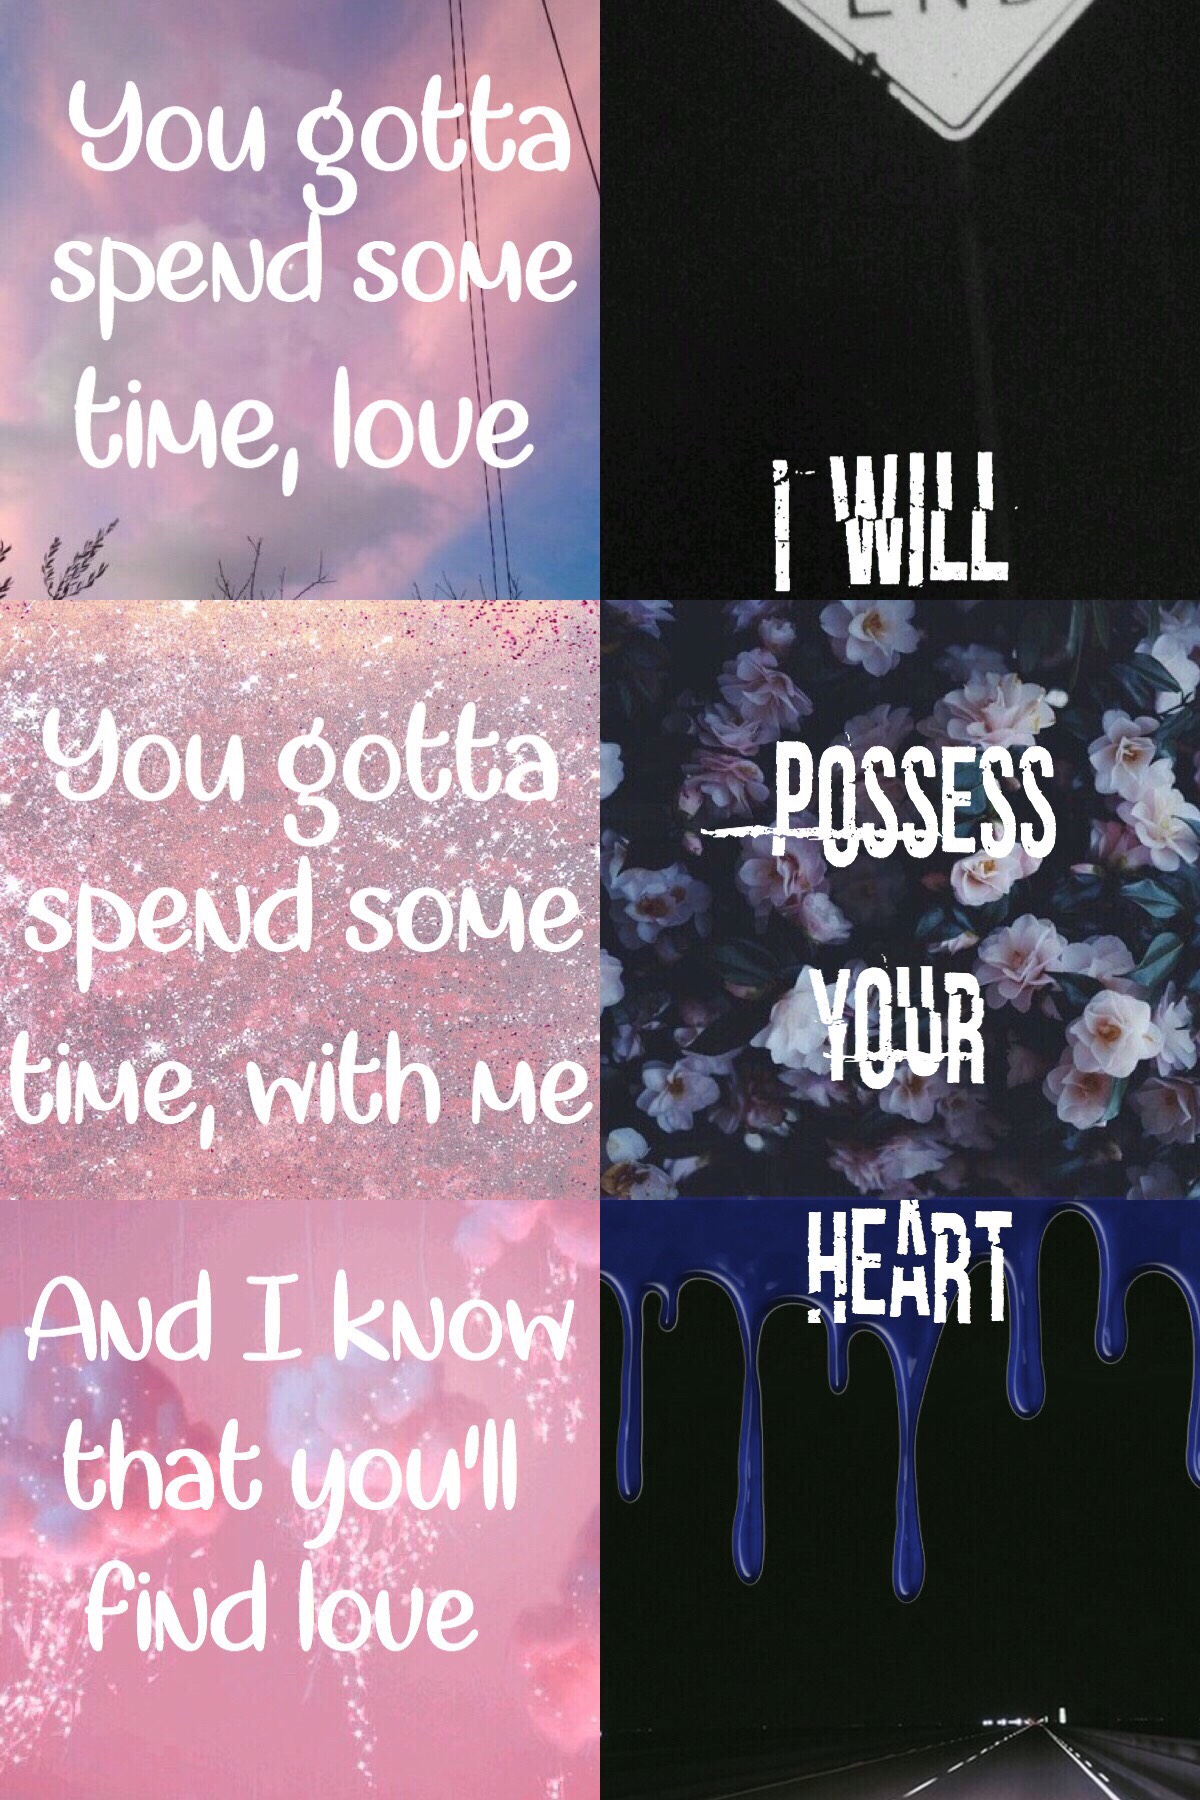 I Will Possess Your Heart// Death Cab For Cutie